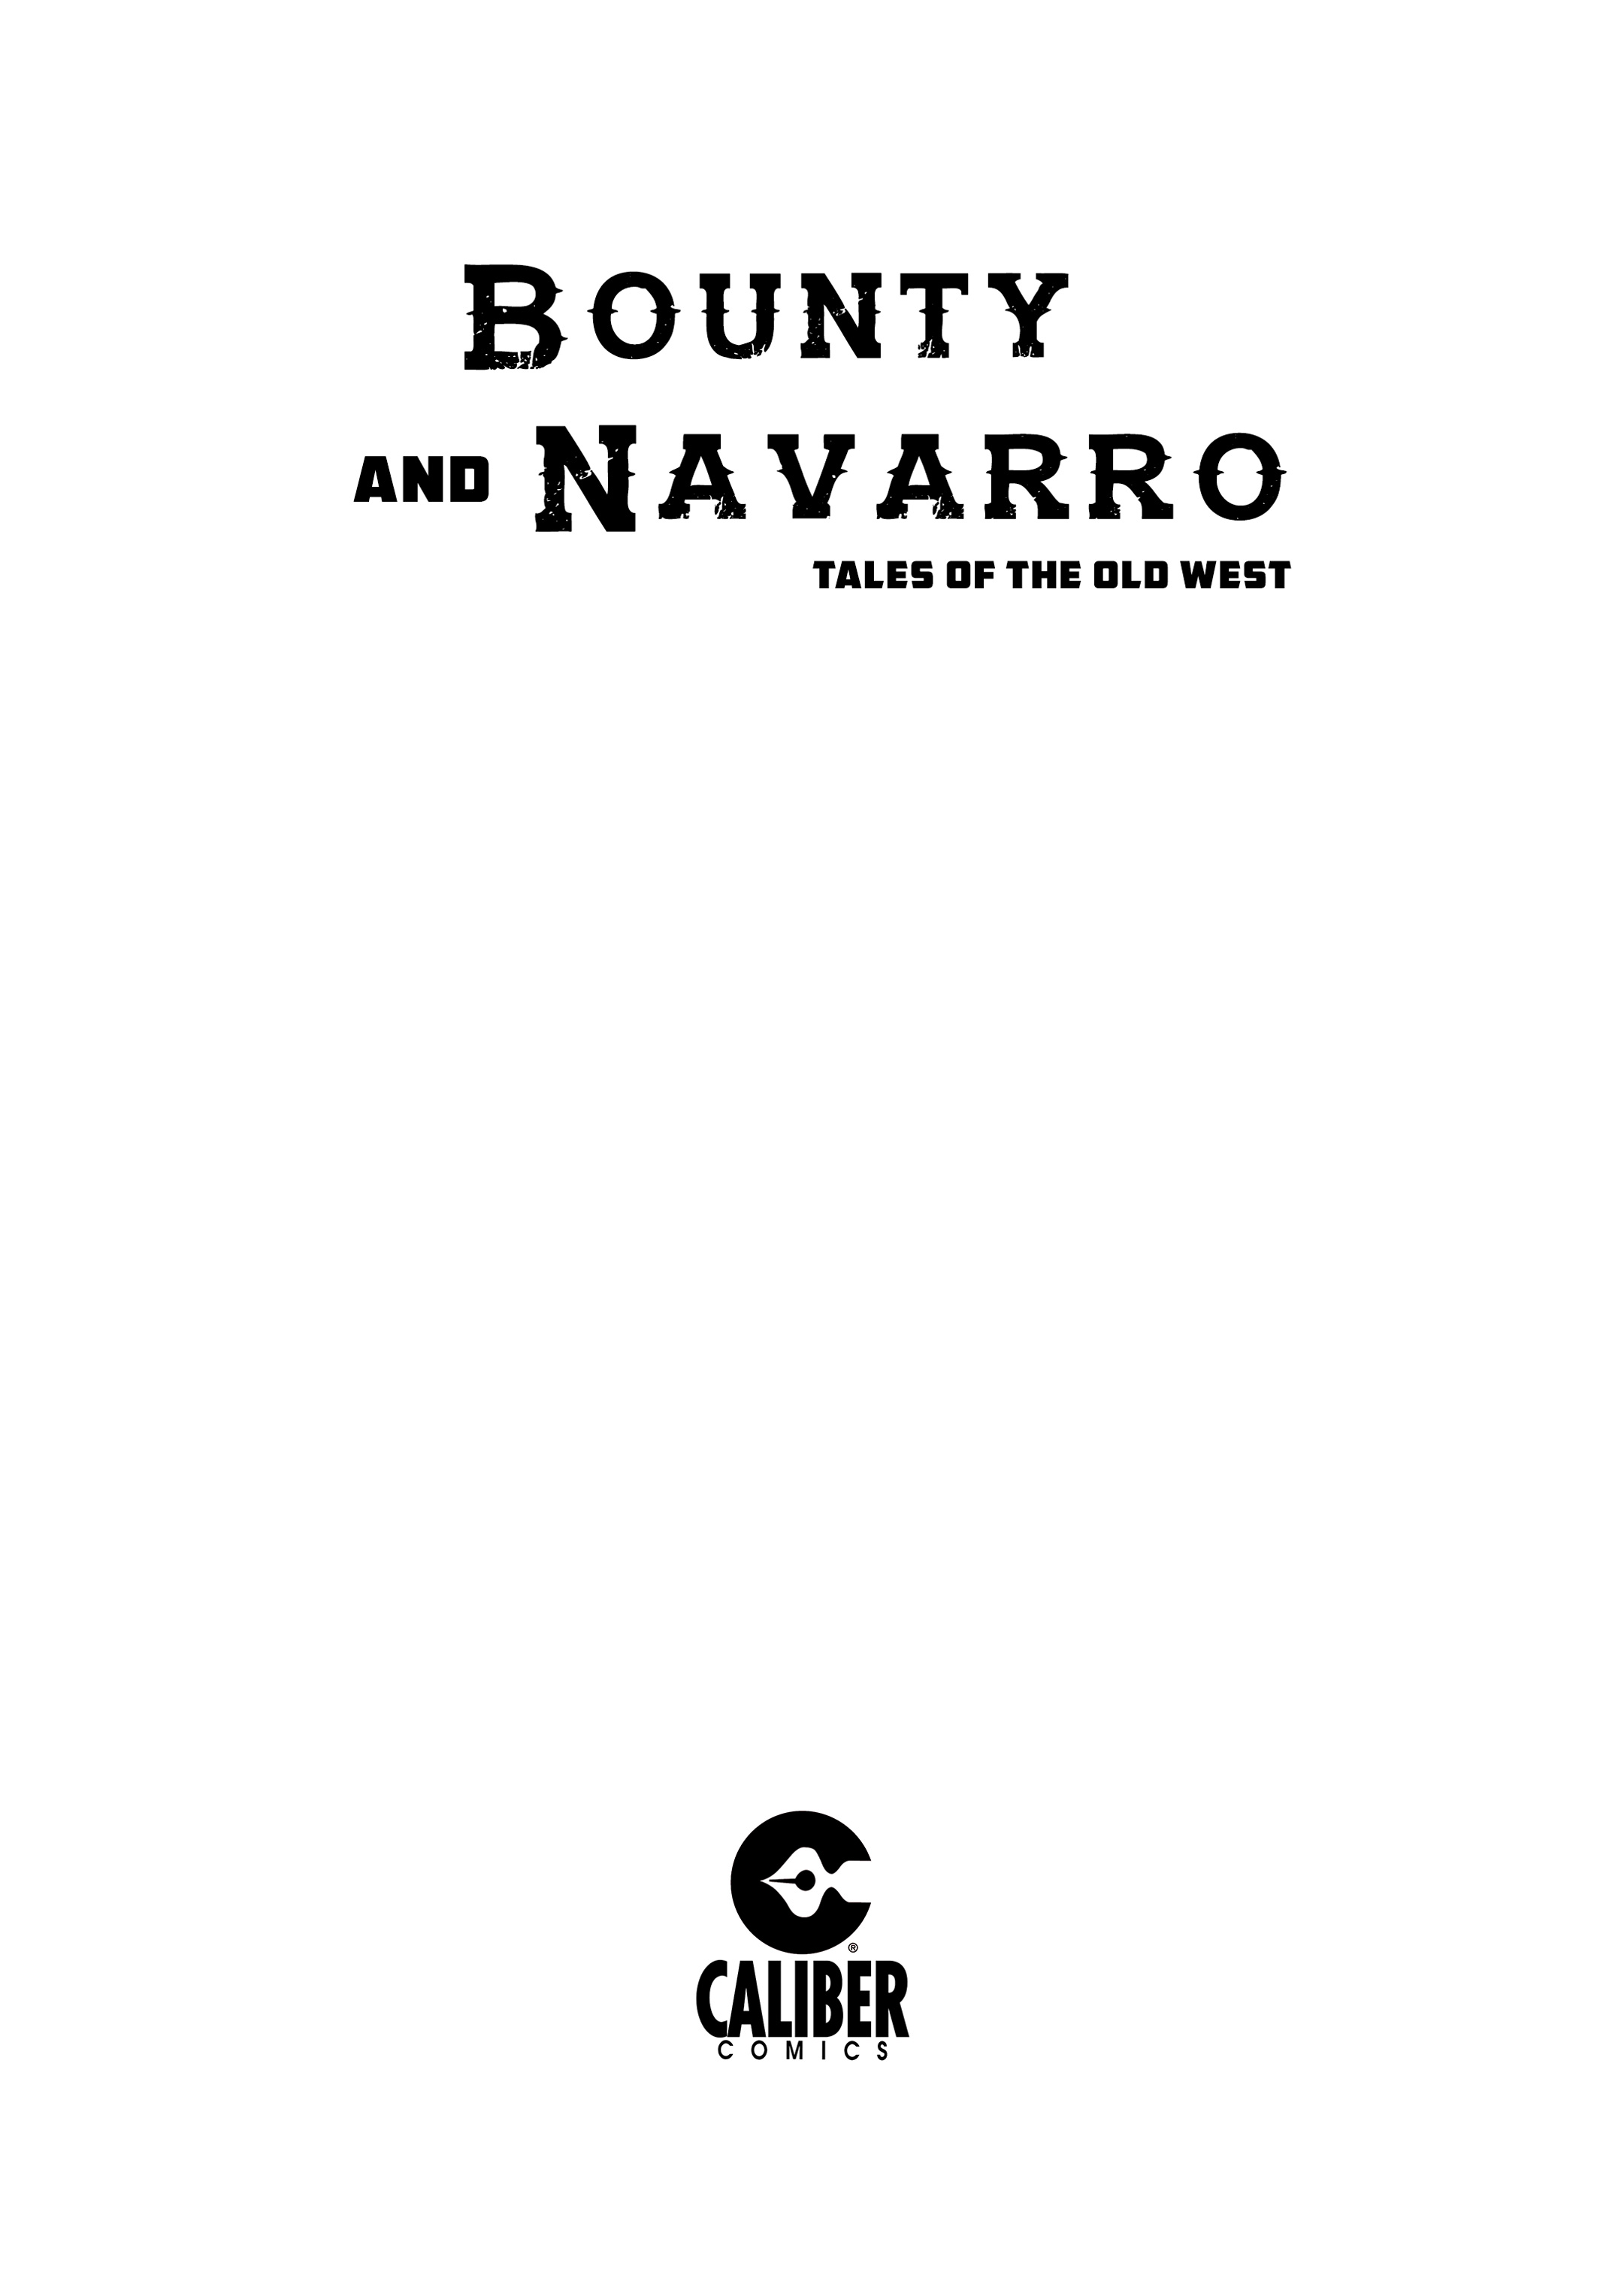 Read online Bounty and Navarro: Tales of the Old West comic -  Issue # TPB - 2